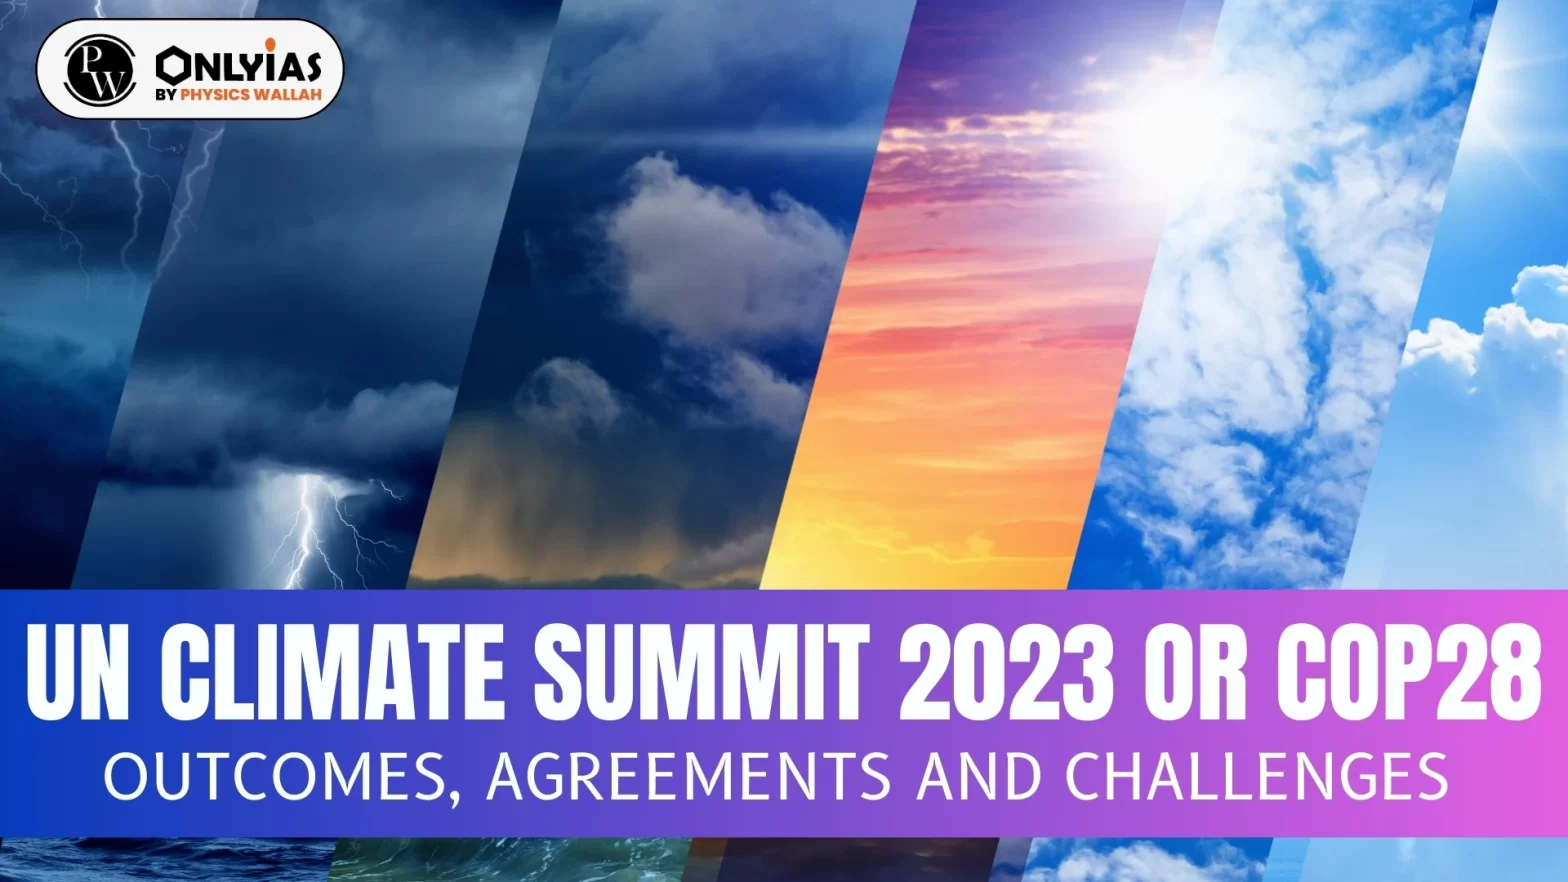 UN Climate Summit 2023 or COP28: Outcomes, Agreements and Challenges